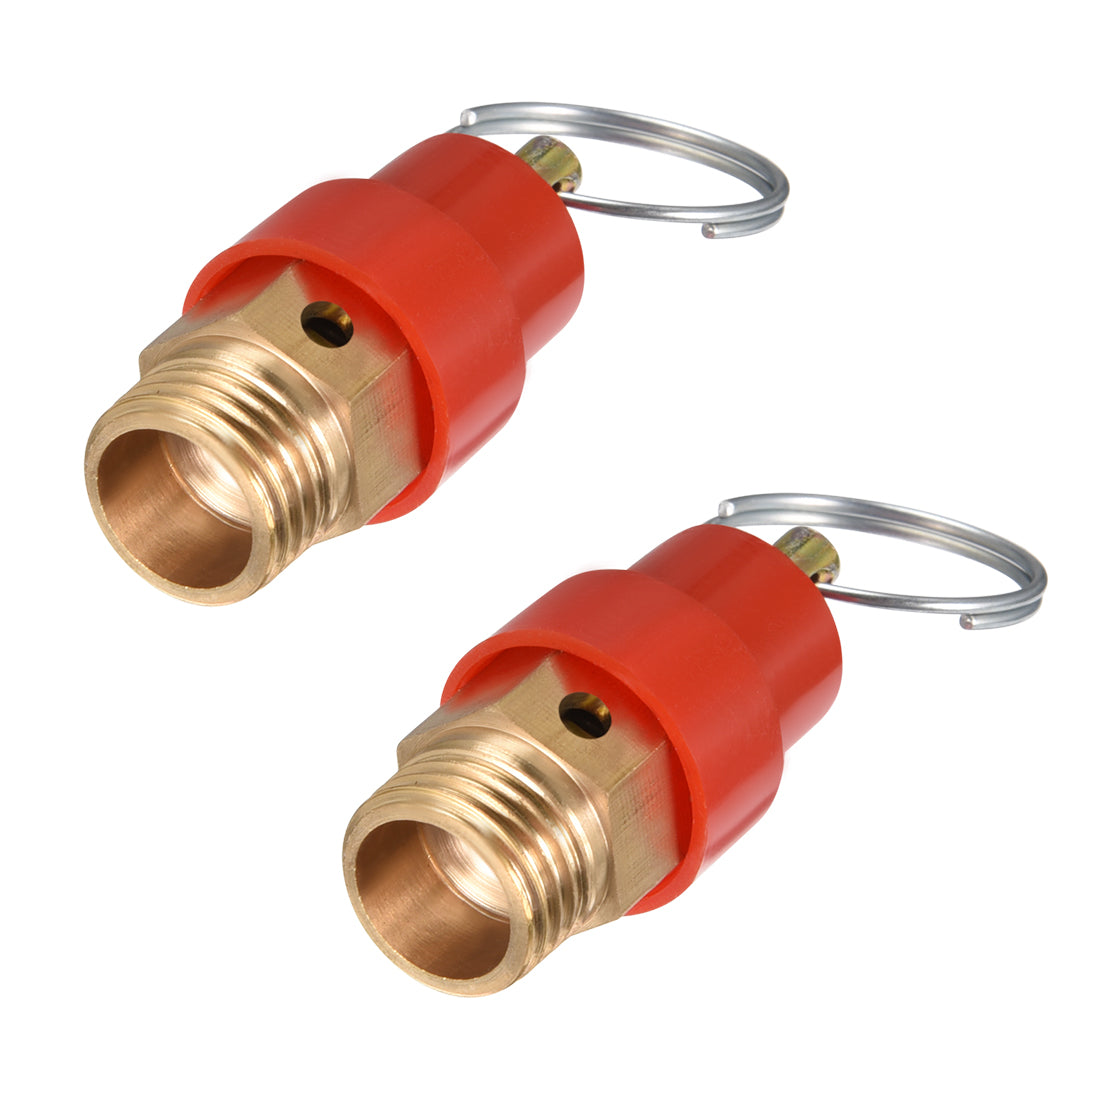 uxcell Uxcell 1/4 BSP Thread Pressure Relief Valve for Air Compressor 0.8Mpa Red Gold Tone w Split Ring 2 pcs